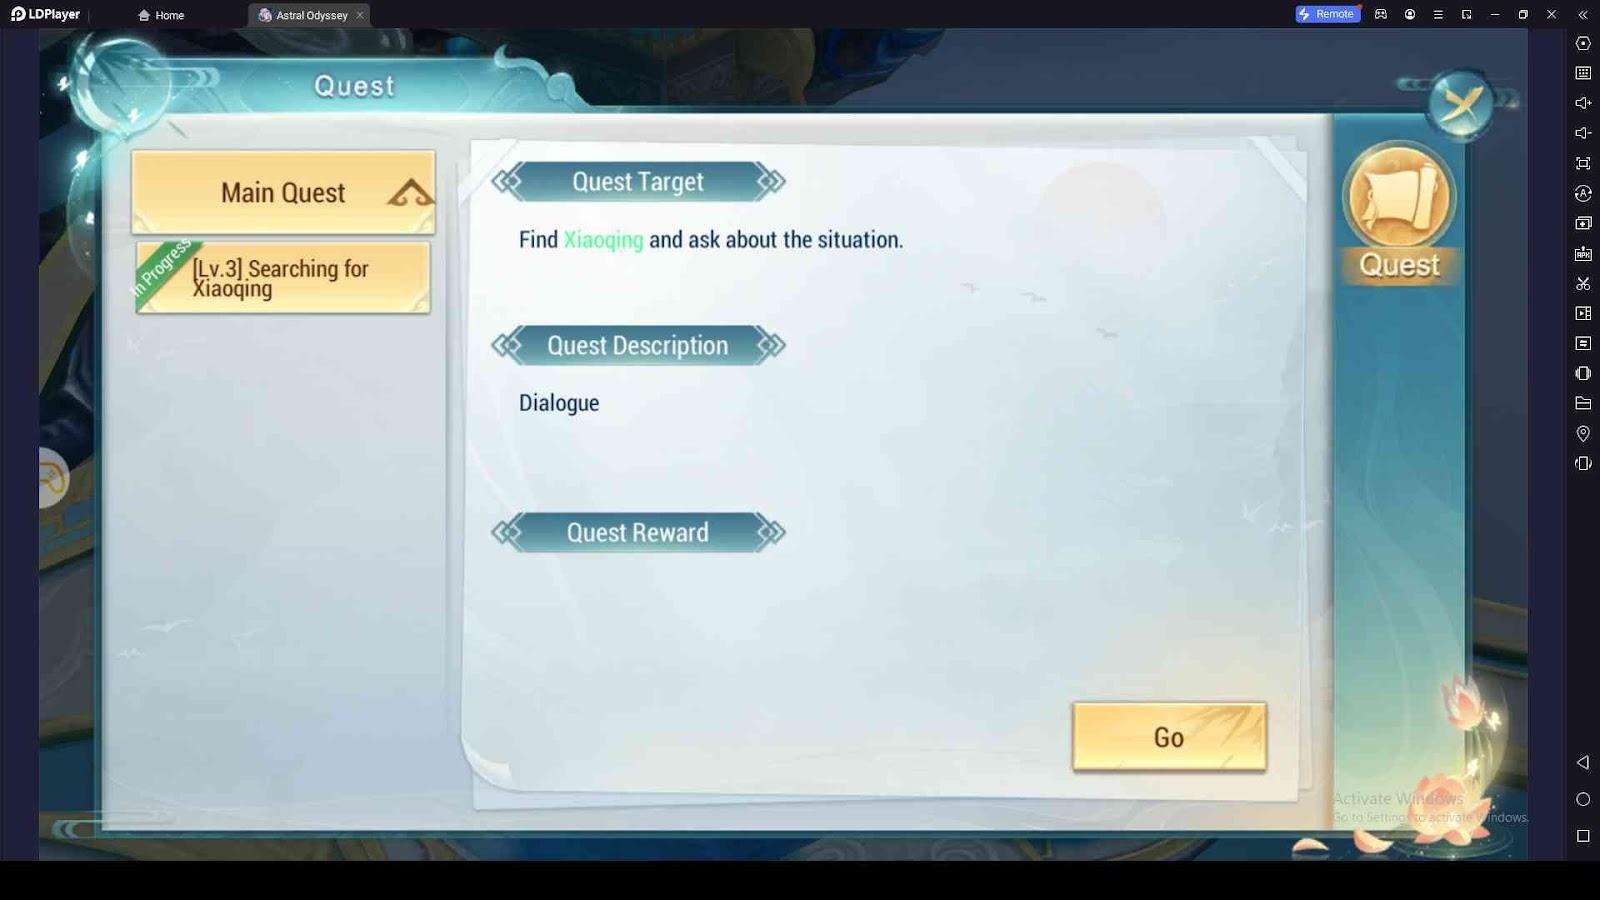 Complete the Main Quests in Astral Odyssey